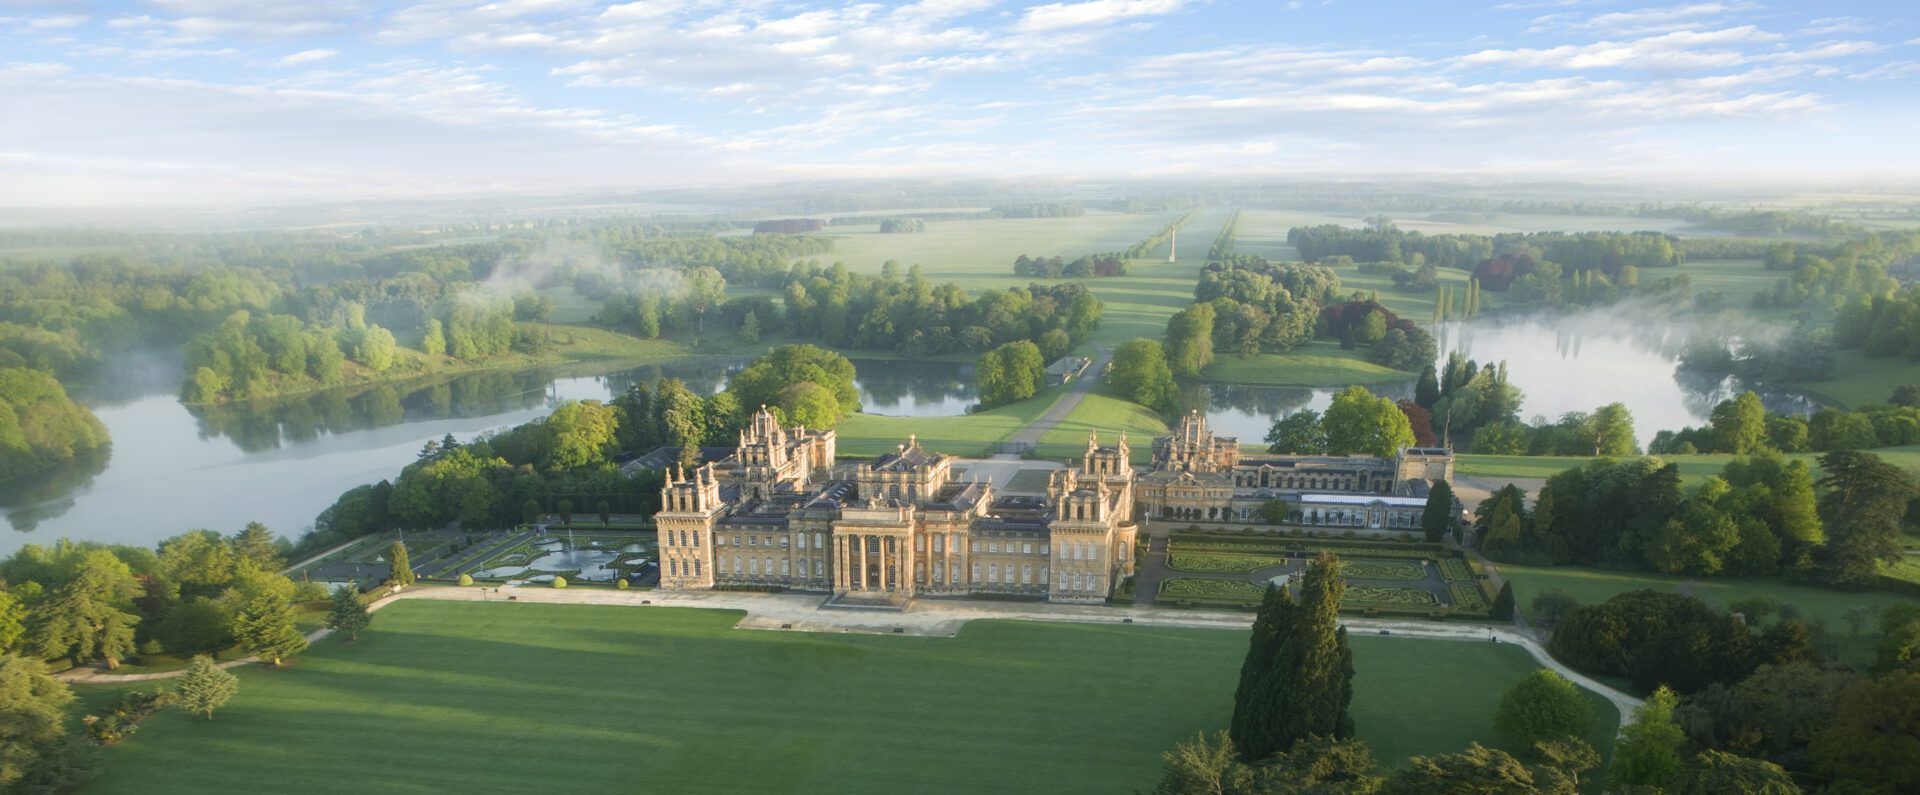 An aerial view of Blenheim Palace